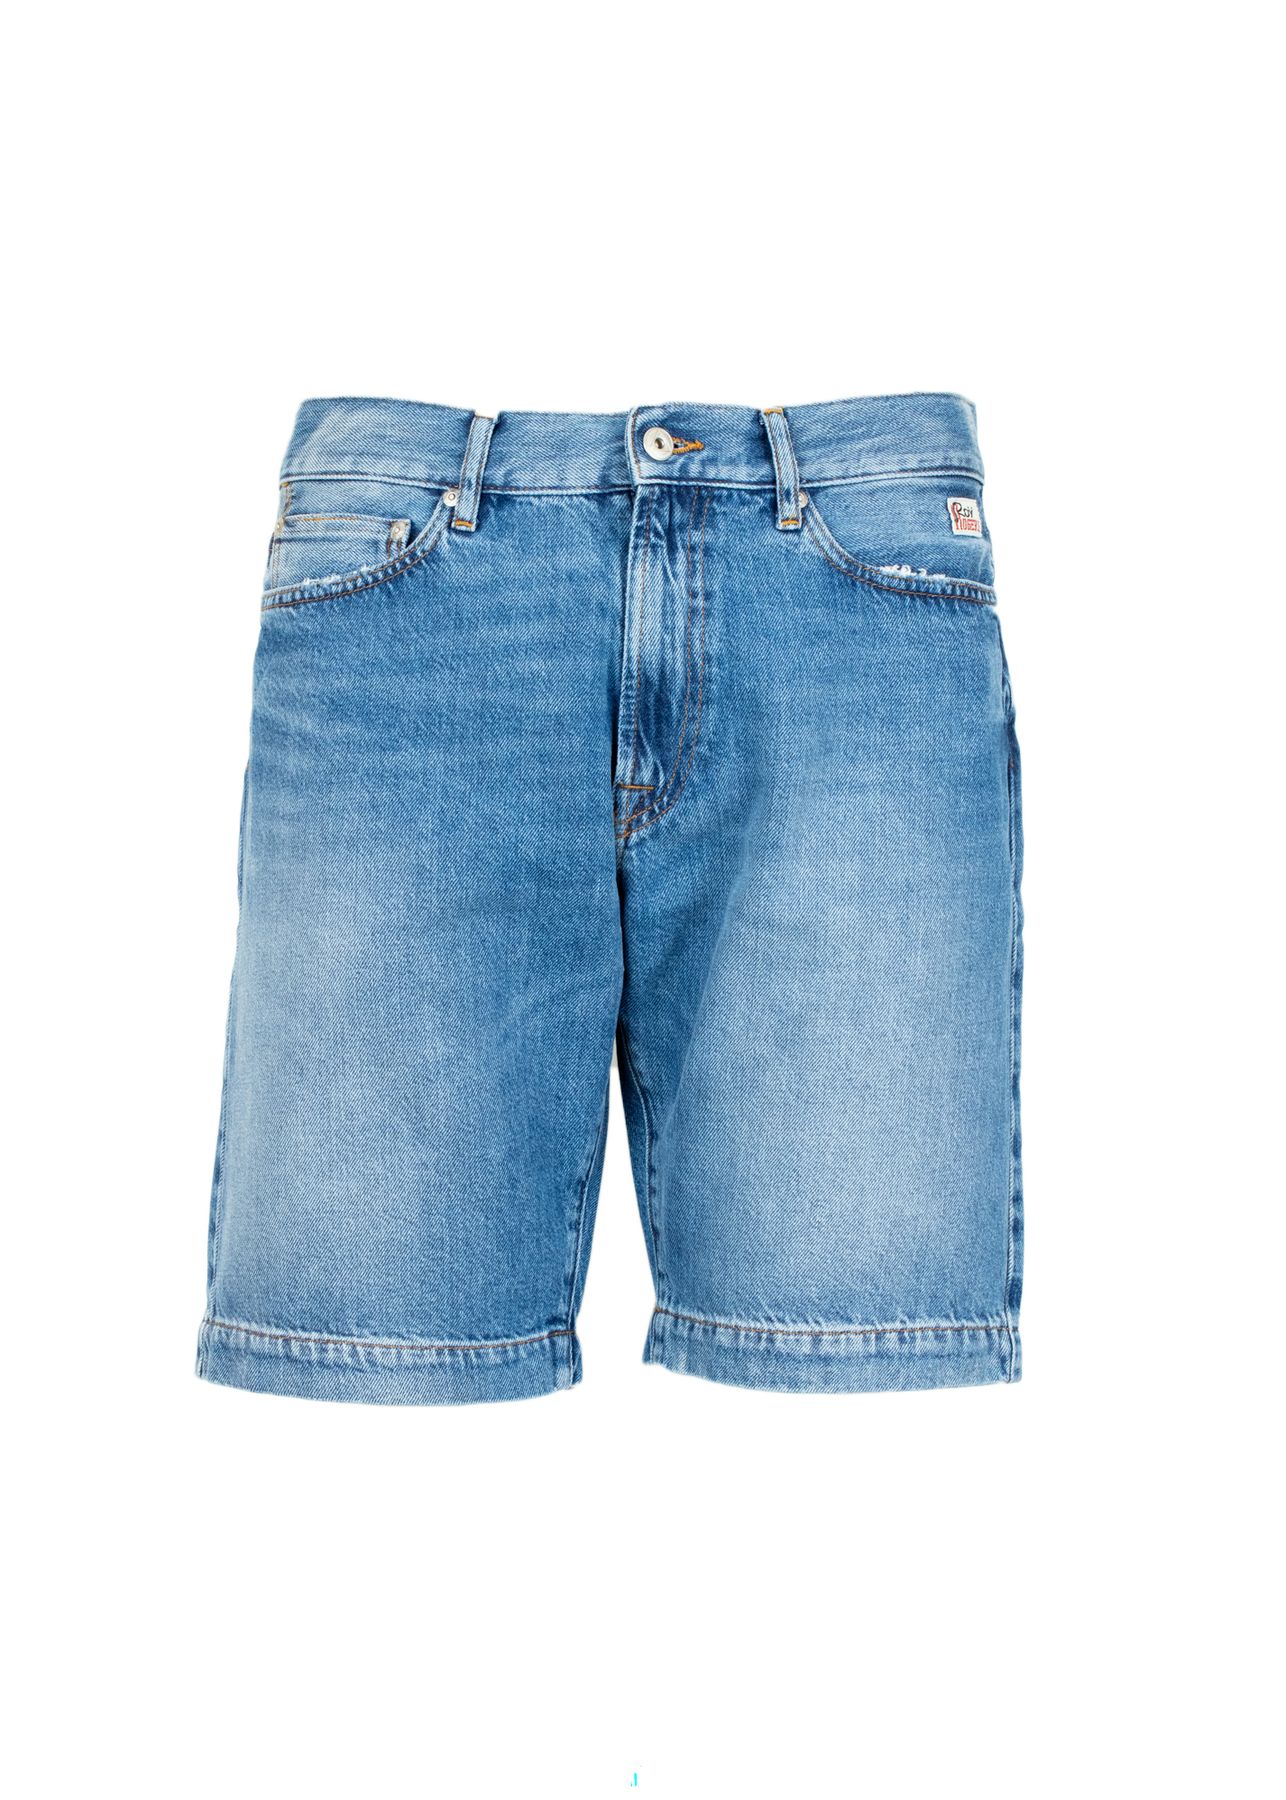 BERMUDA JEANS ROY ROGER'S - Immagine 1